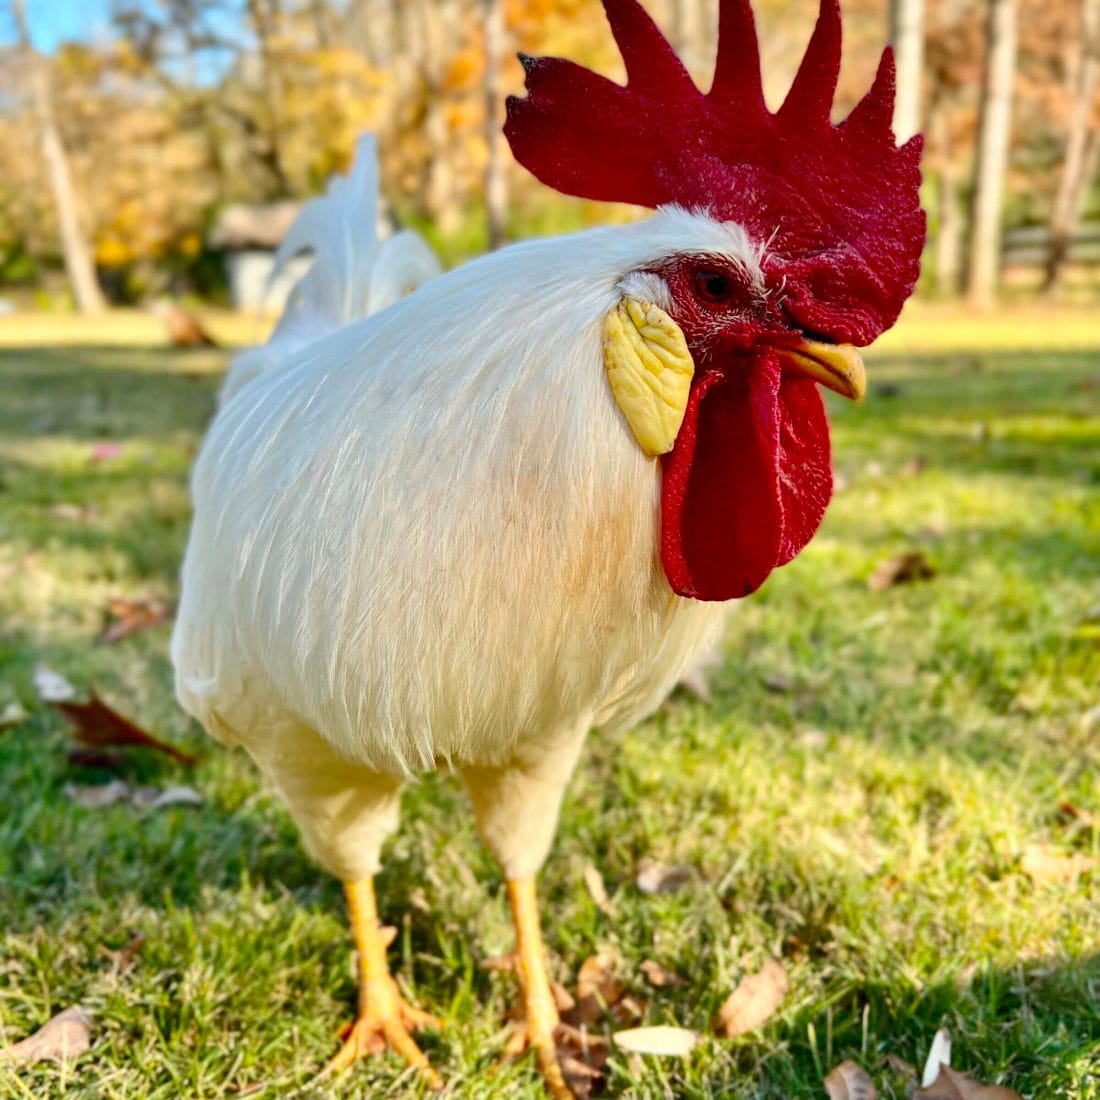 Our Rooster, Cacique.